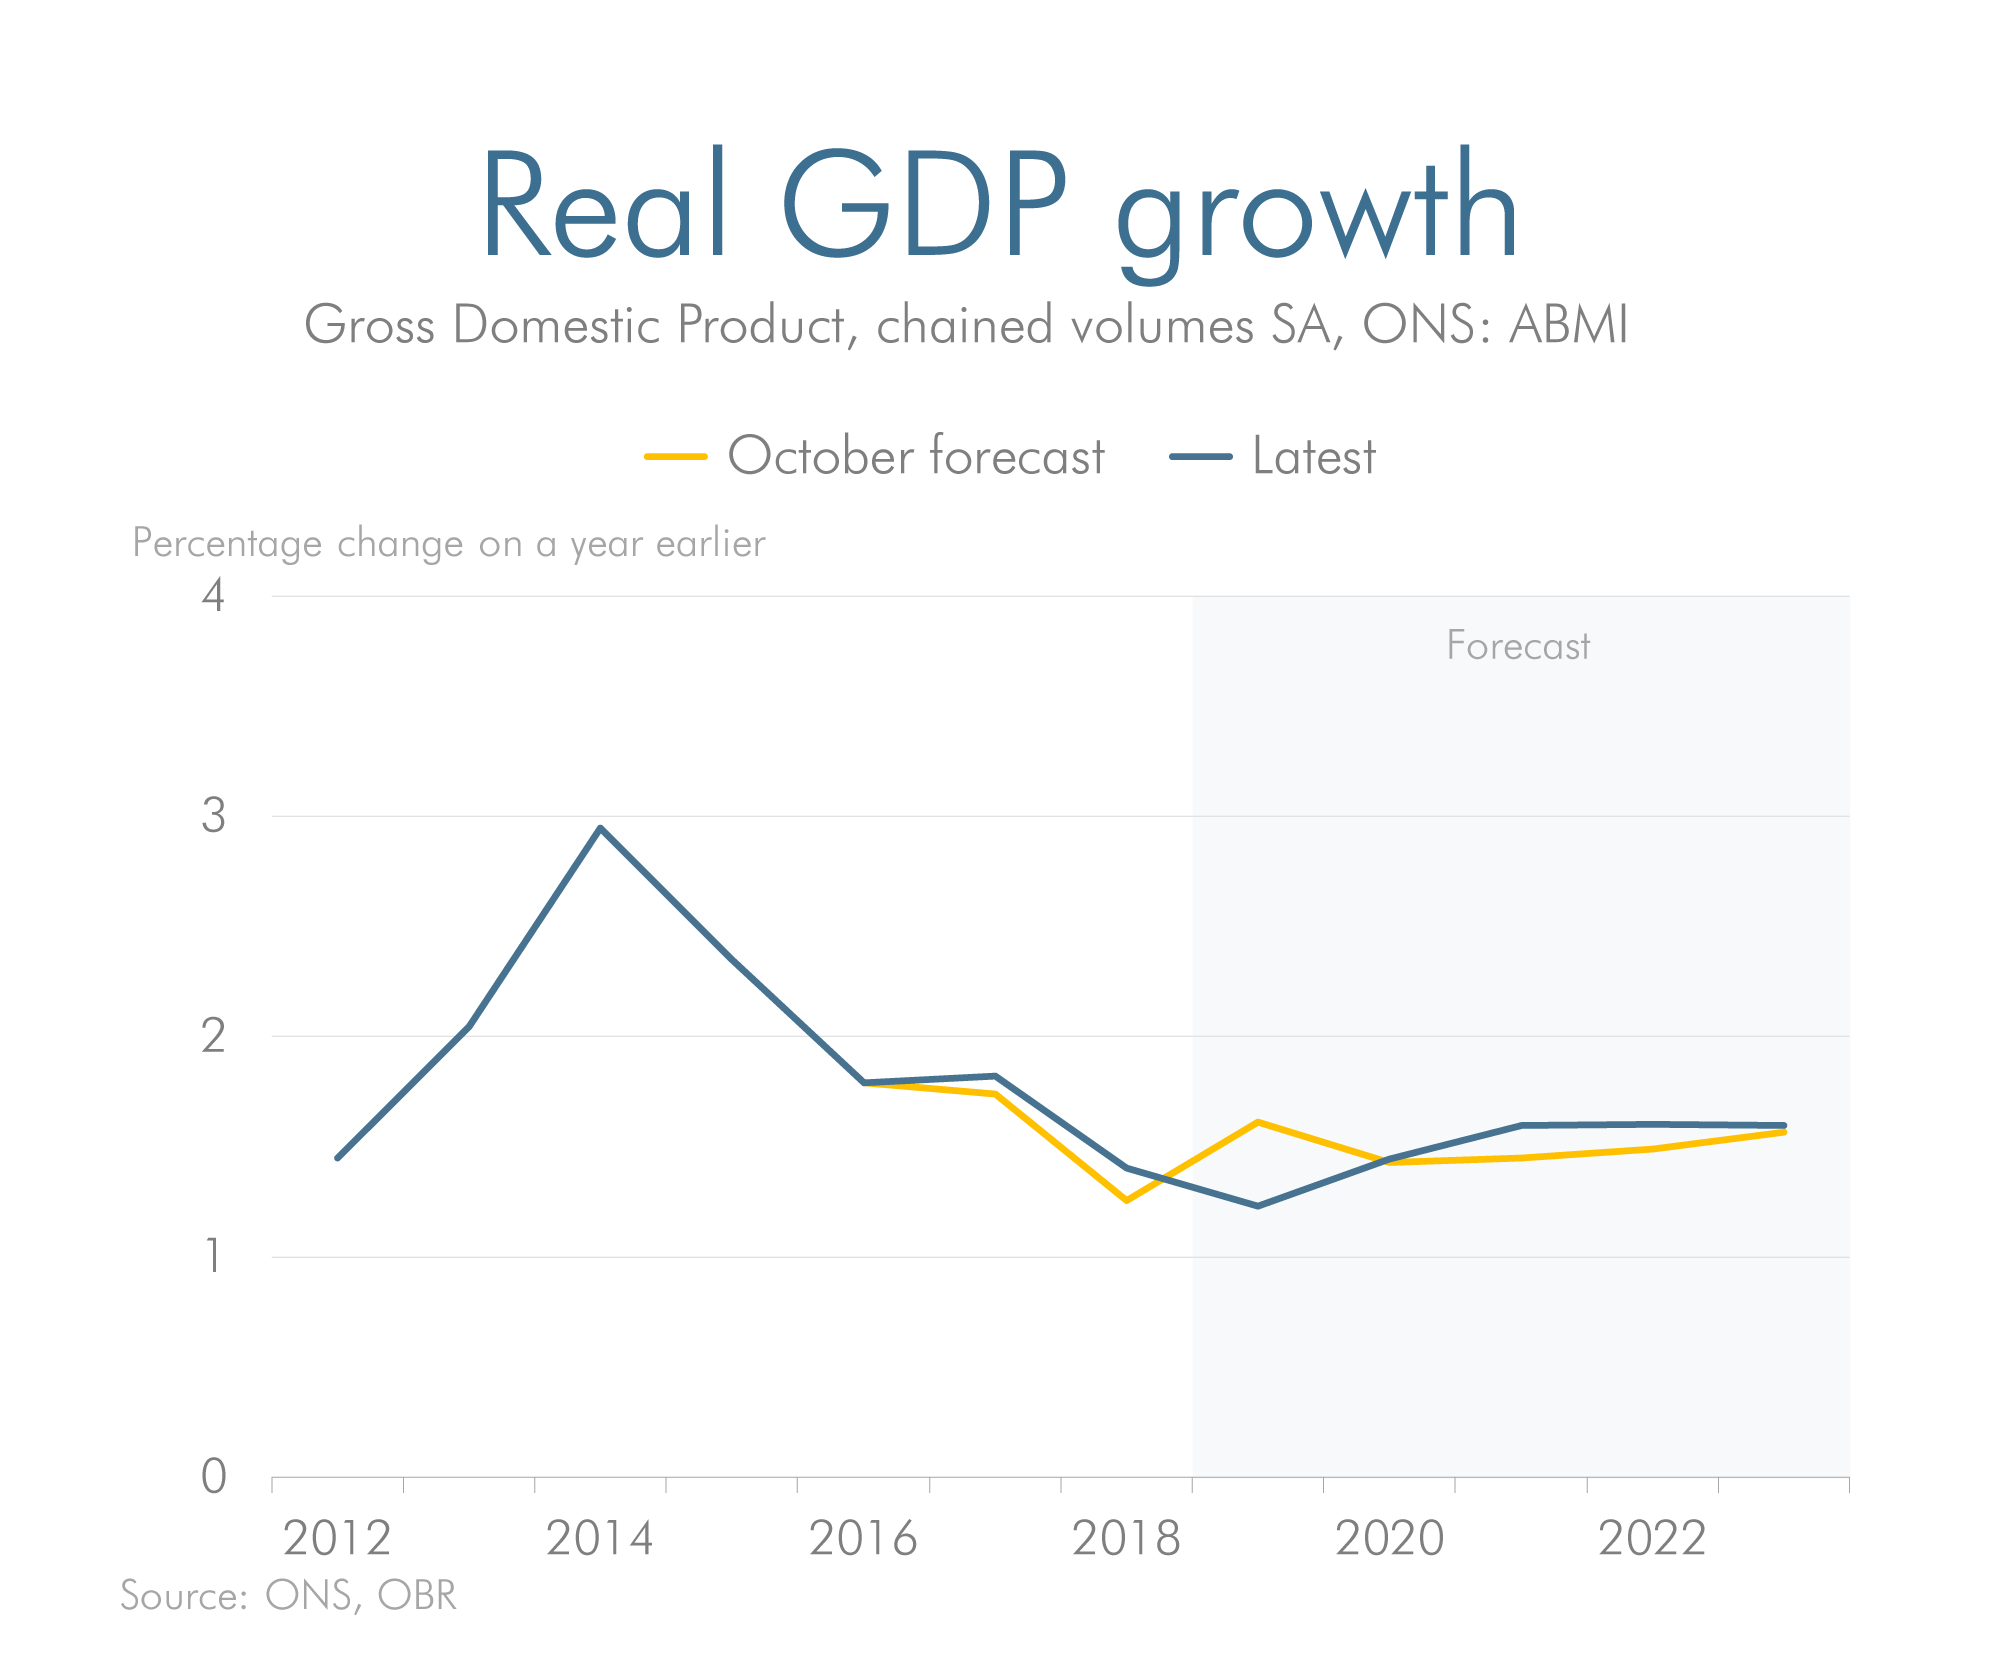 Latest forecast versus previous forecast for real GDP growth